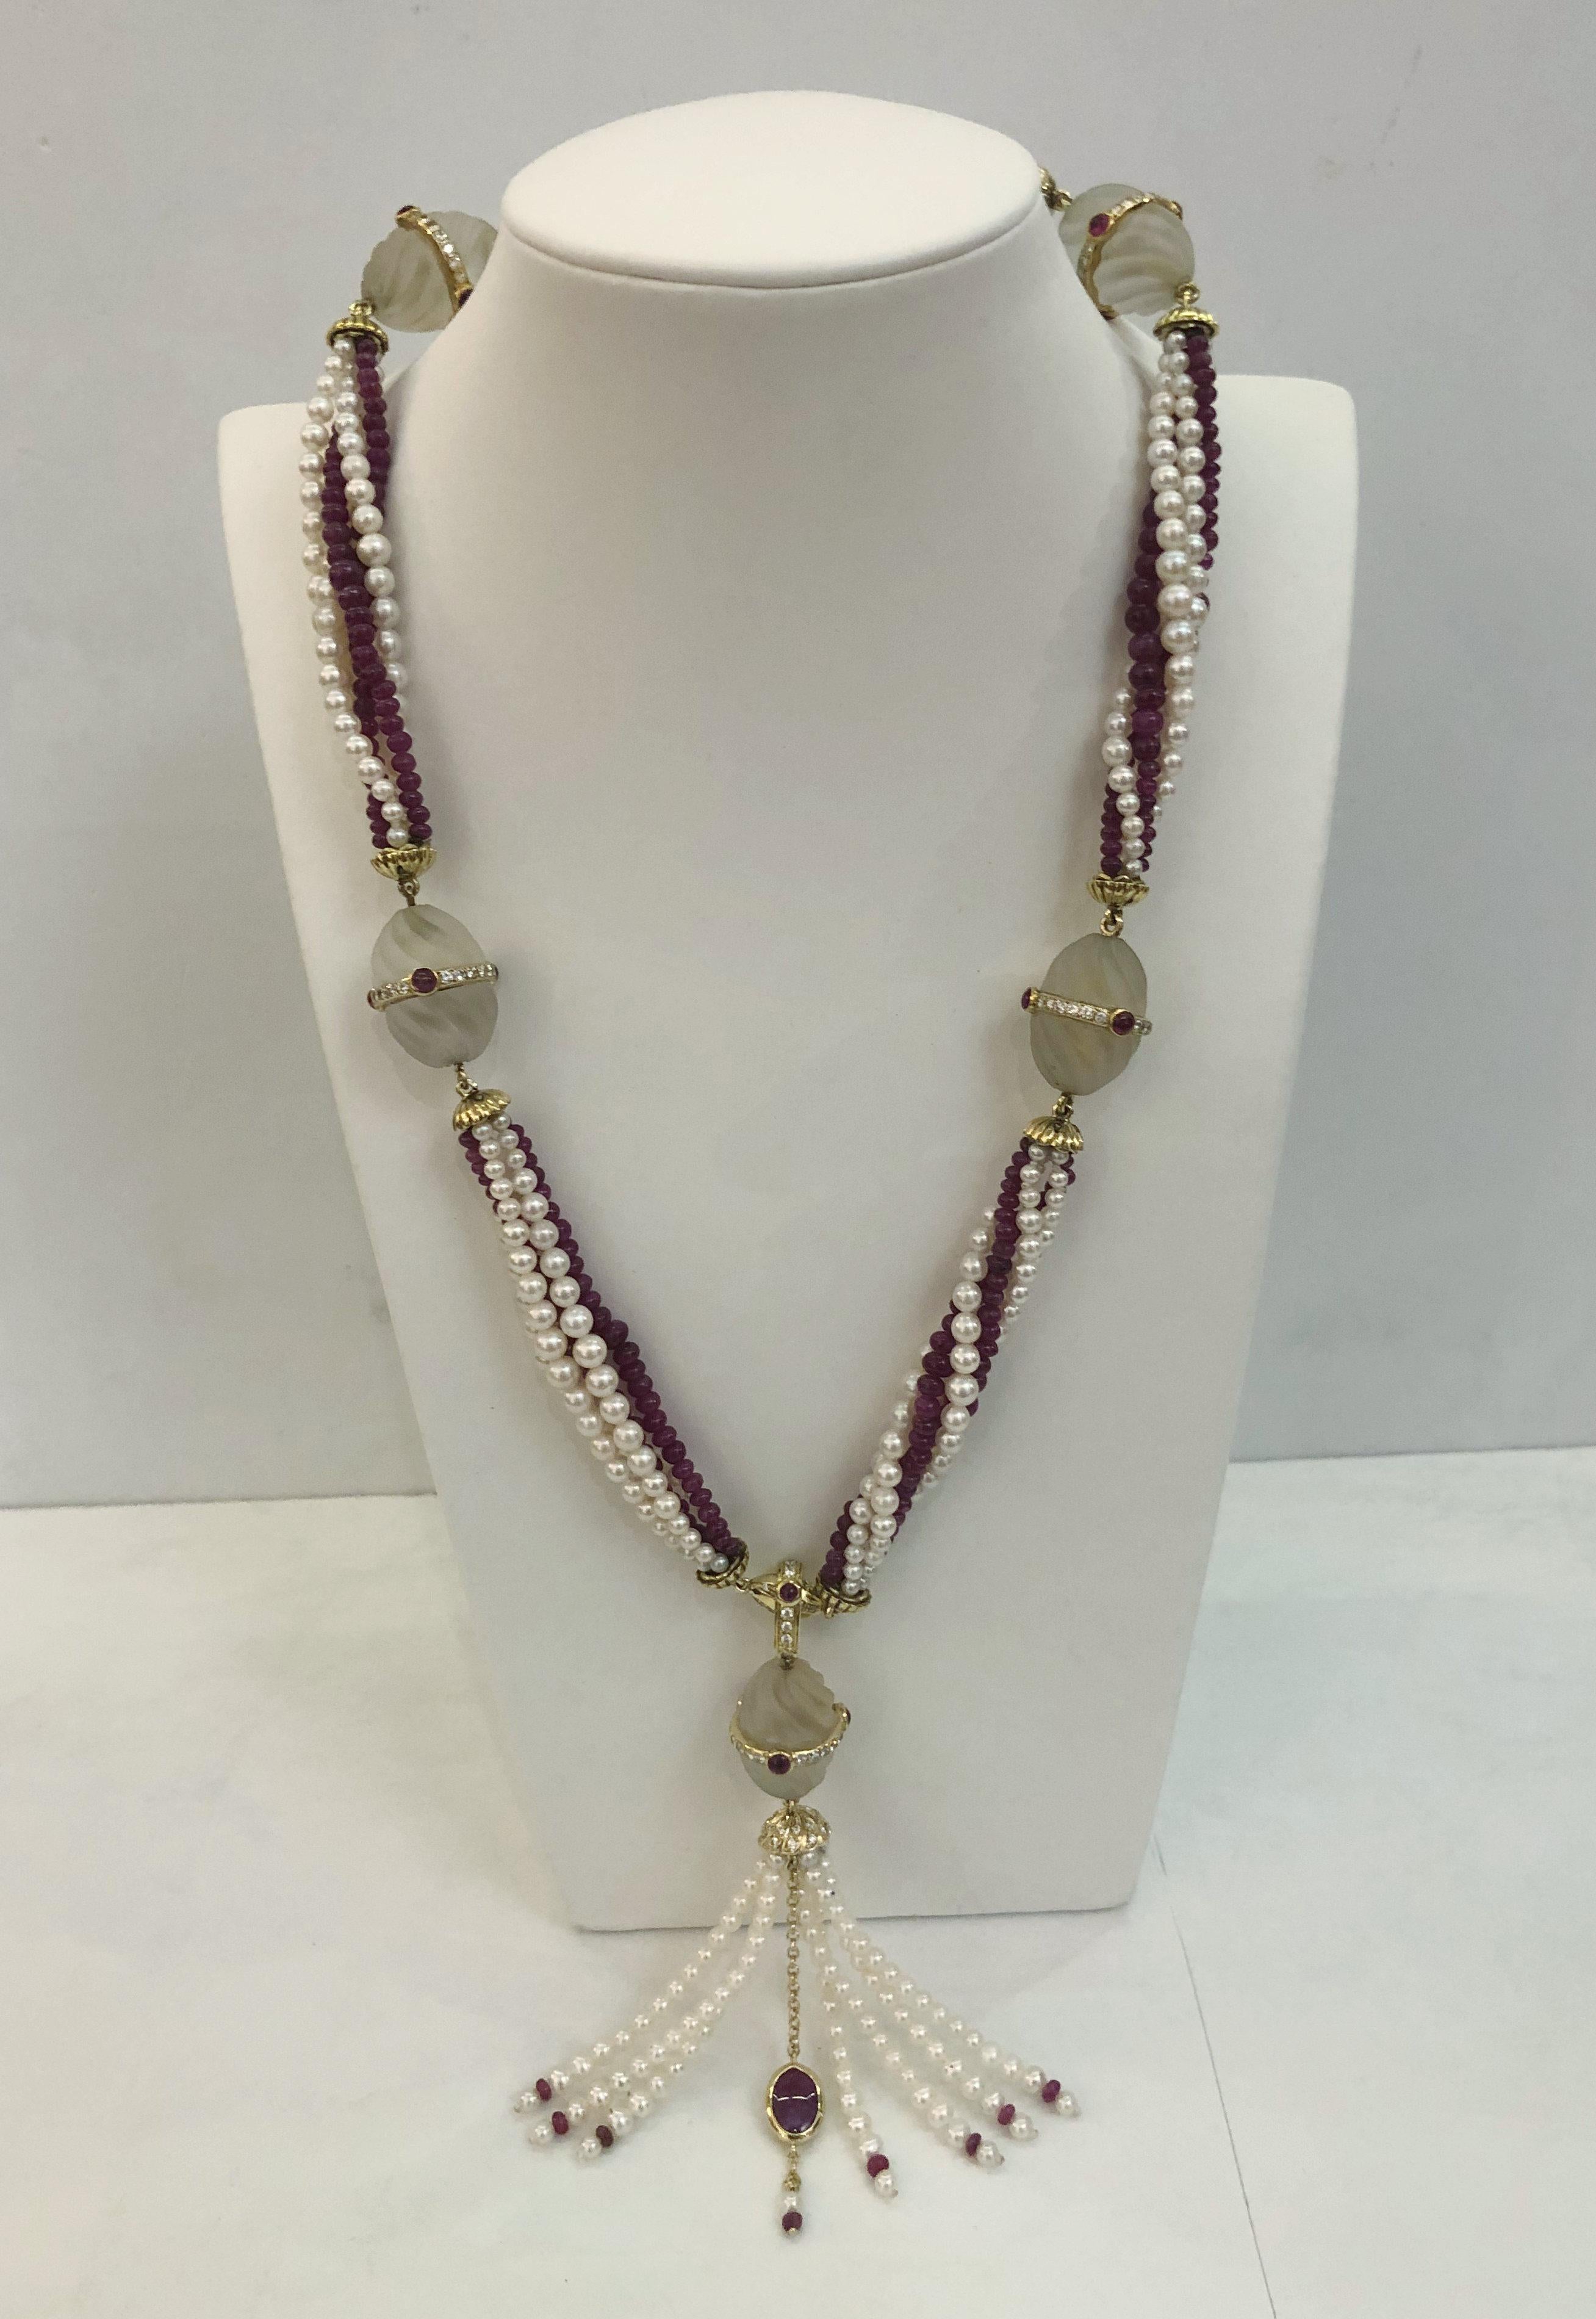 Vintage Italian necklace with pearls, rubies and 5 oval rock crystal elements, finished with 18 karat gold and diamonds for a total of 3 karats.
The pendant is detachable with a 3.76 karat cabouscon ruby.
Made in Italy / 1960-1970s
Necklace length